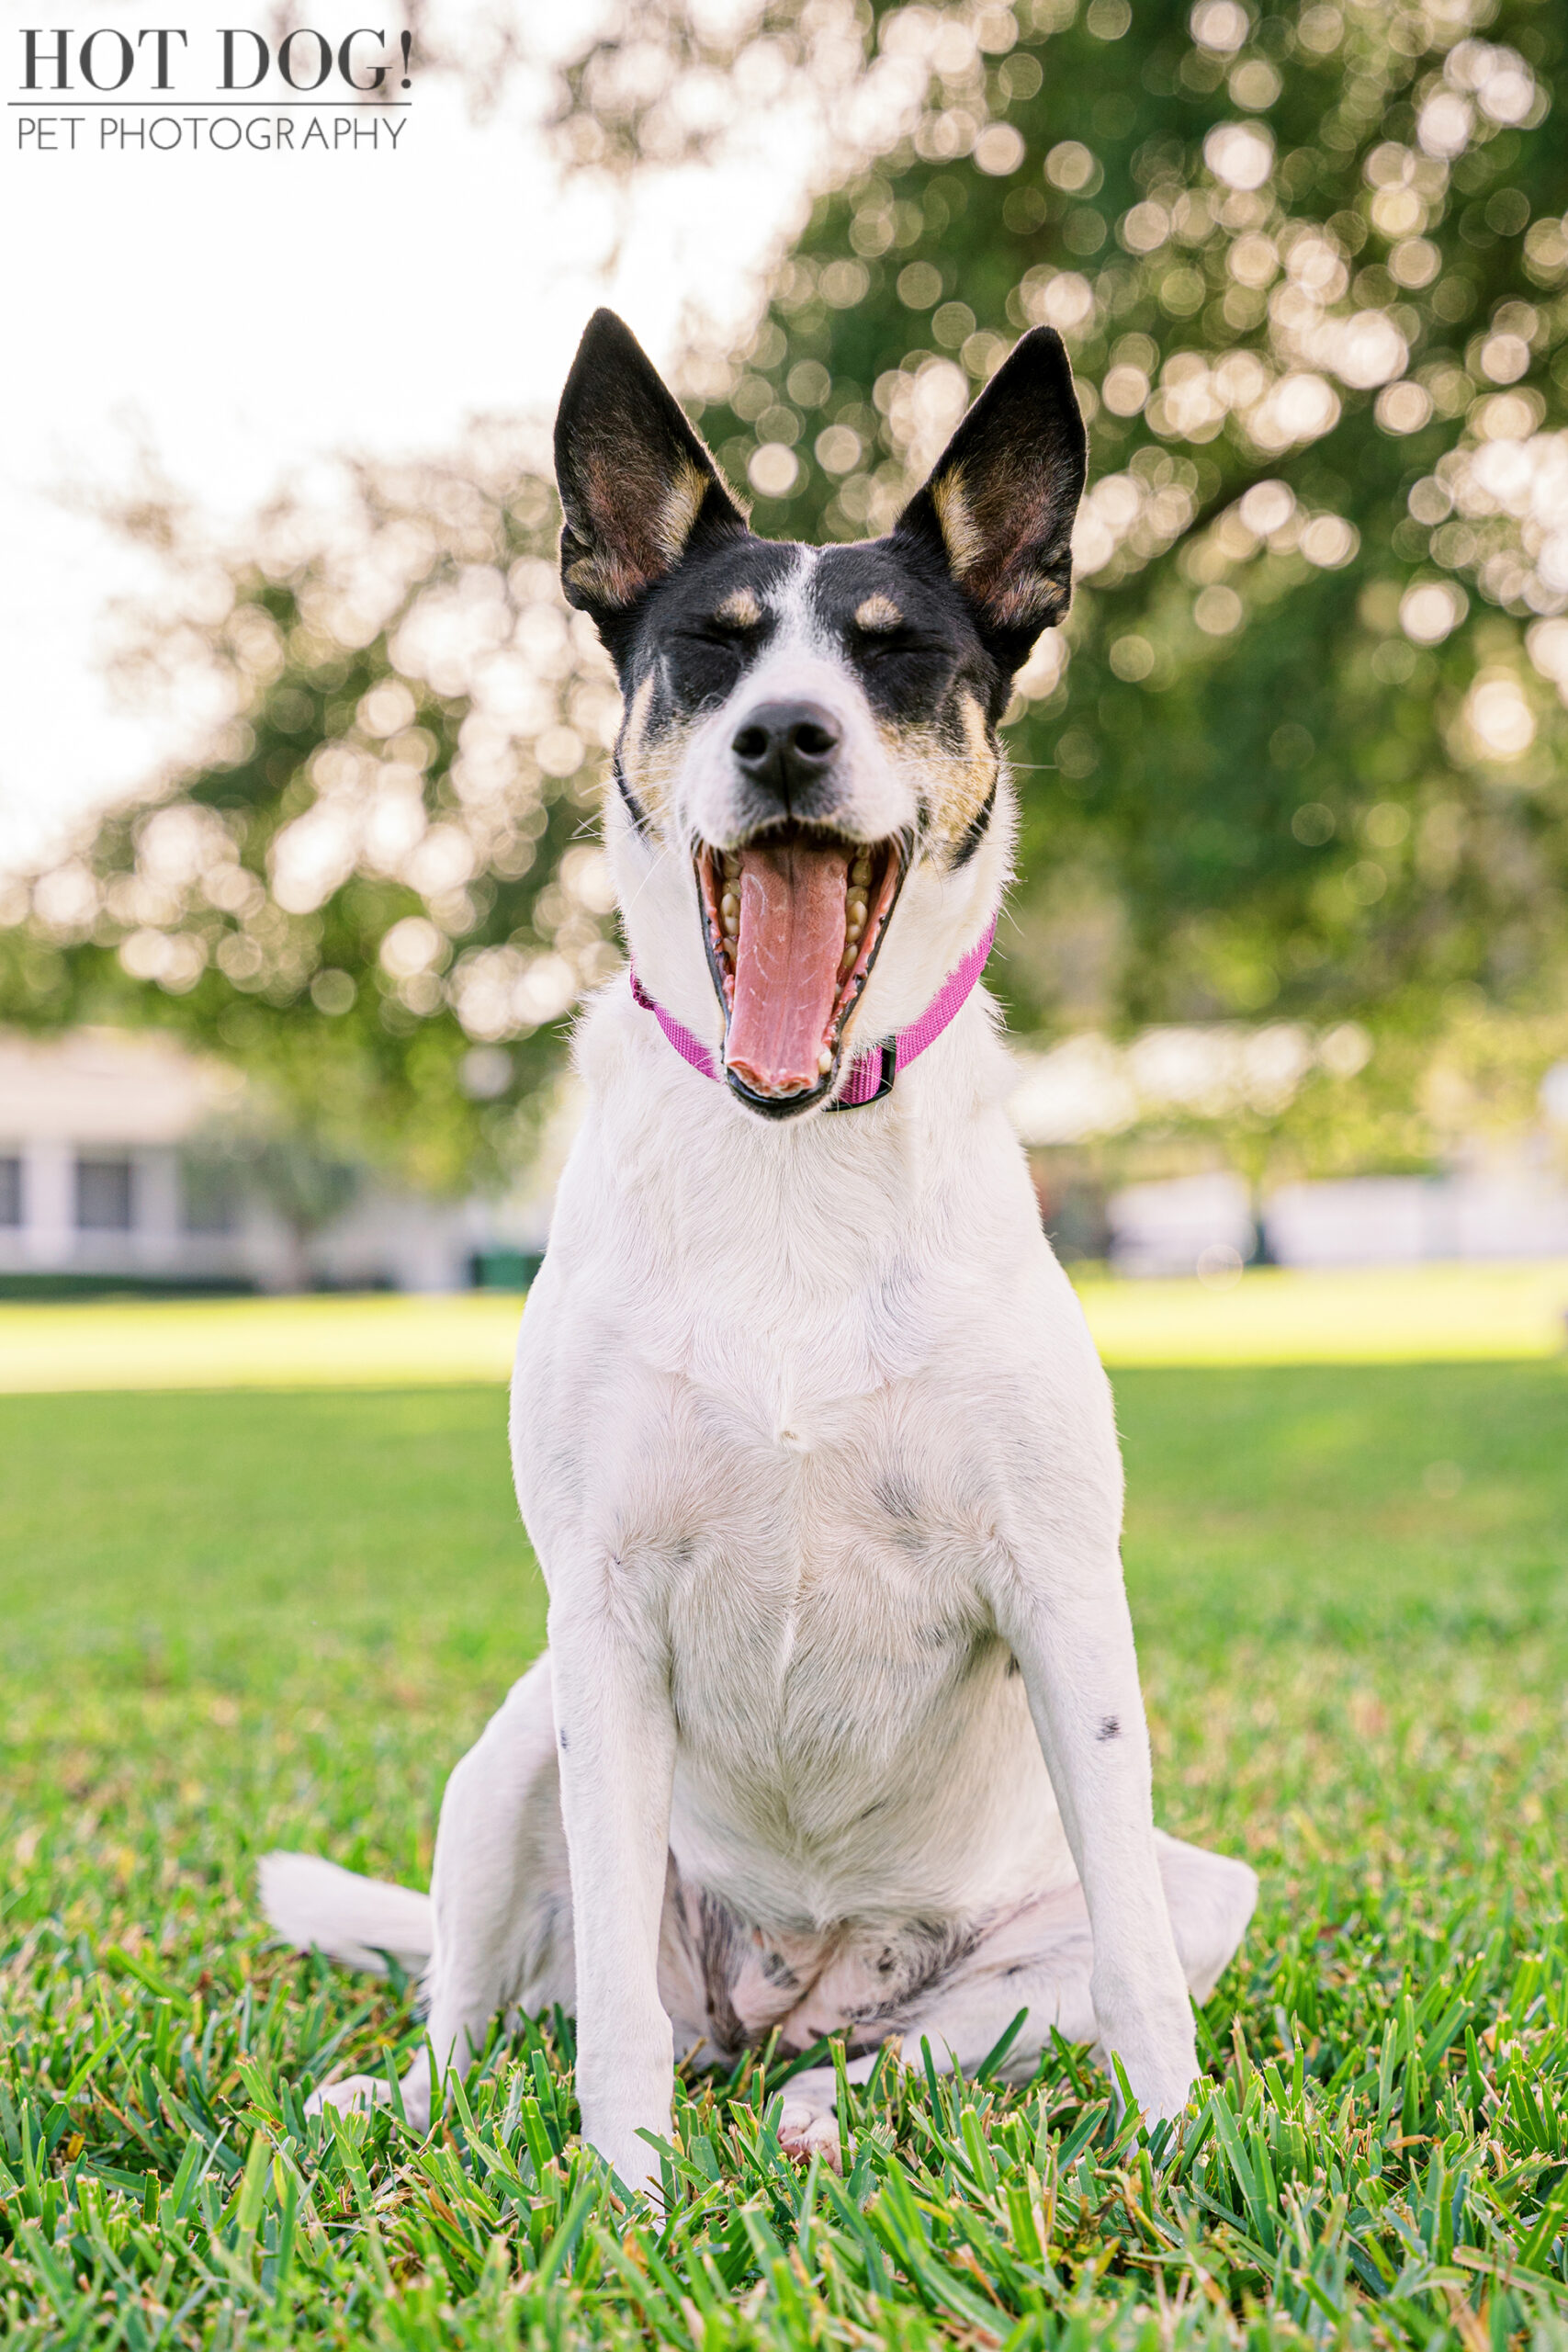 Adopting Love, One Wag at a Time: Hot Dog! Pet Photography inspires Orlando pet lovers to consider rescue through Miracle, the adoptable rat terrier mix's heartwarming story.